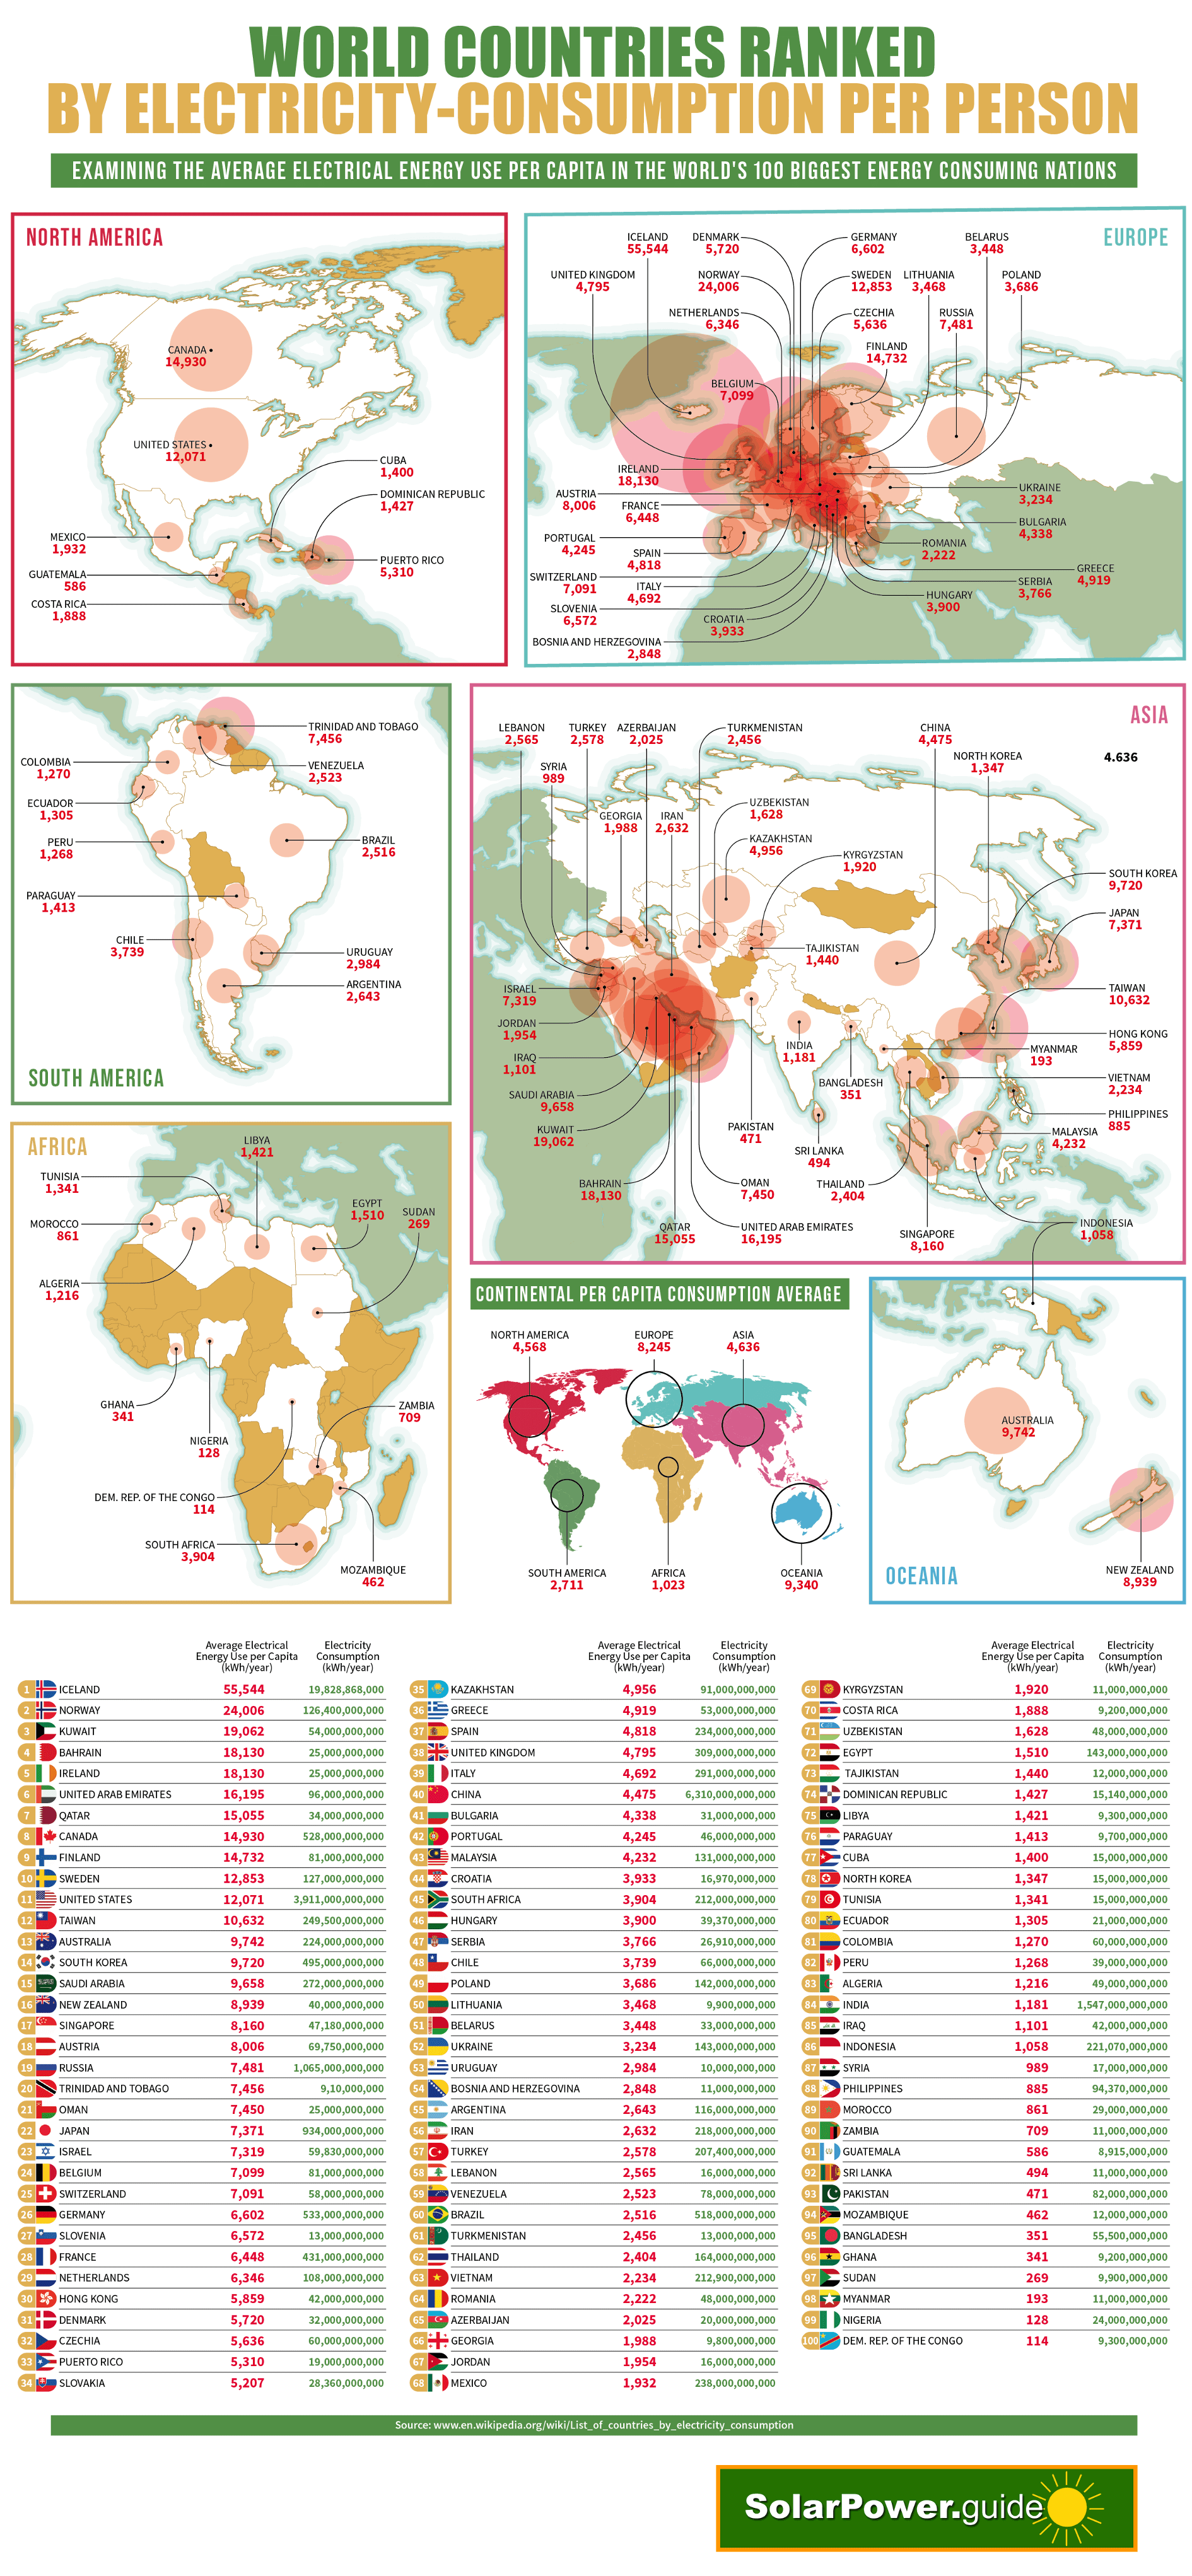 World Countries Ranked by Electricity-Consumption Per Person